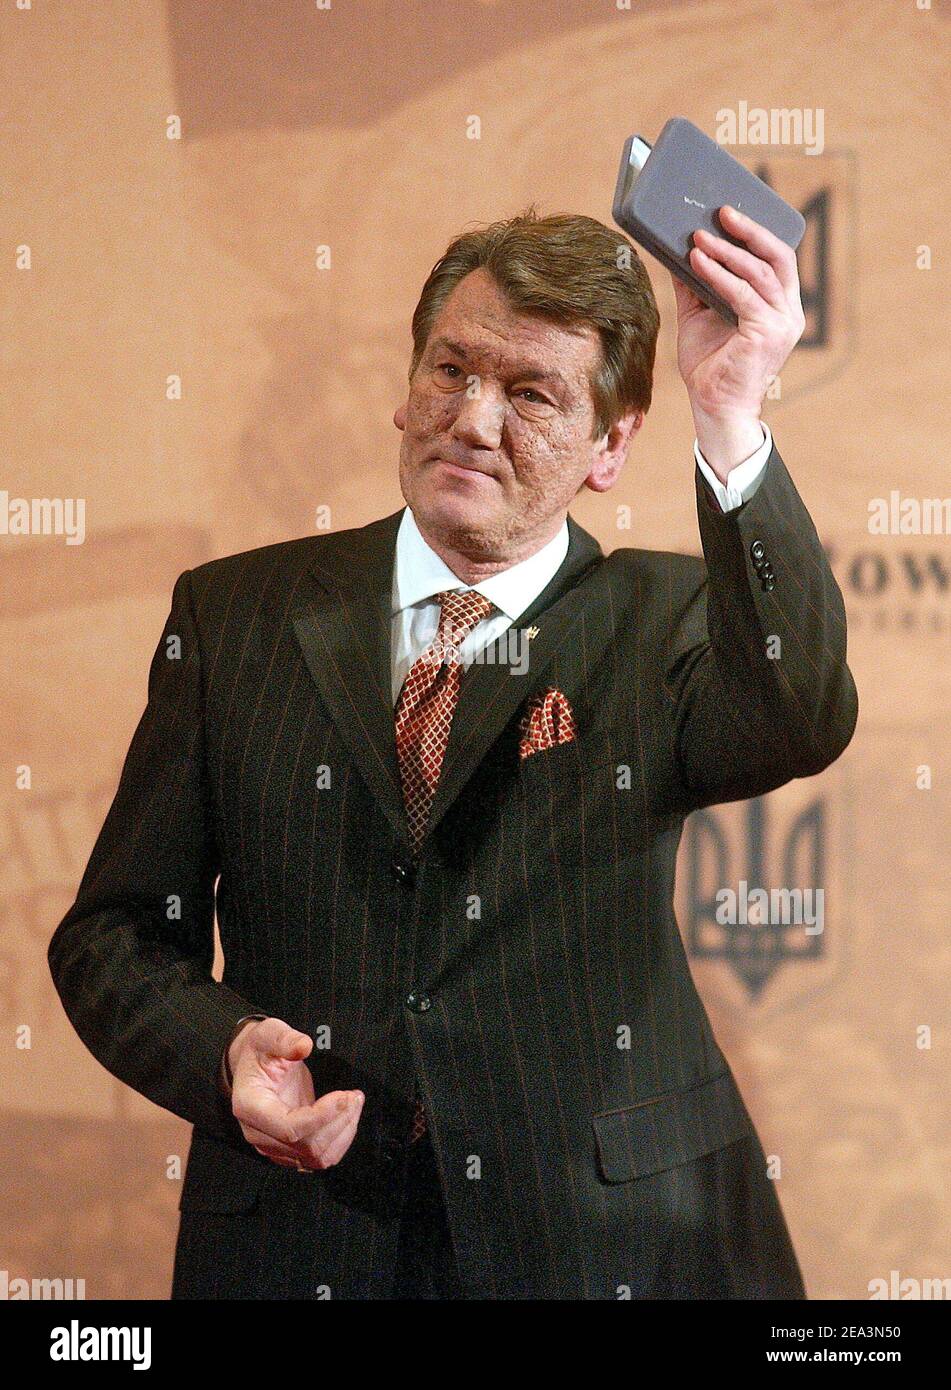 Ukrainian President Viktor Yushchenko on Monday April 04 2005, address and receives the Georgetown University President's Medal. at the Georgetown University in Washington during his visit to the United States. (Pictured:Viktor Yushchenko) Photo by Olivier Douliery/ABACA Stock Photo